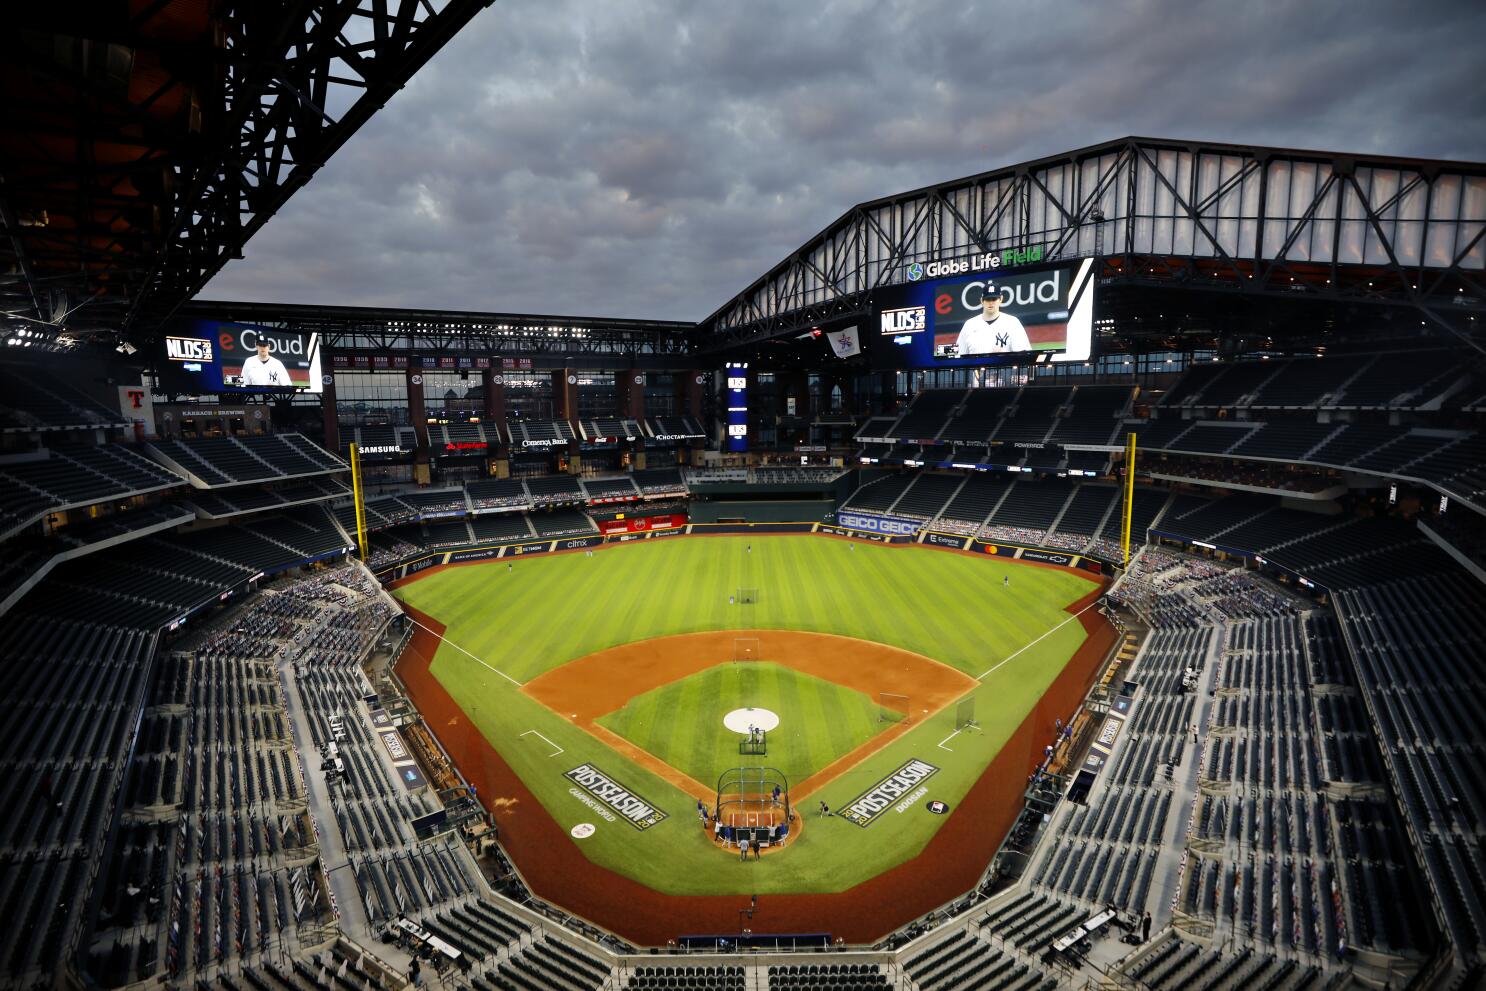 Braves playoff tickets, What to know about getting them